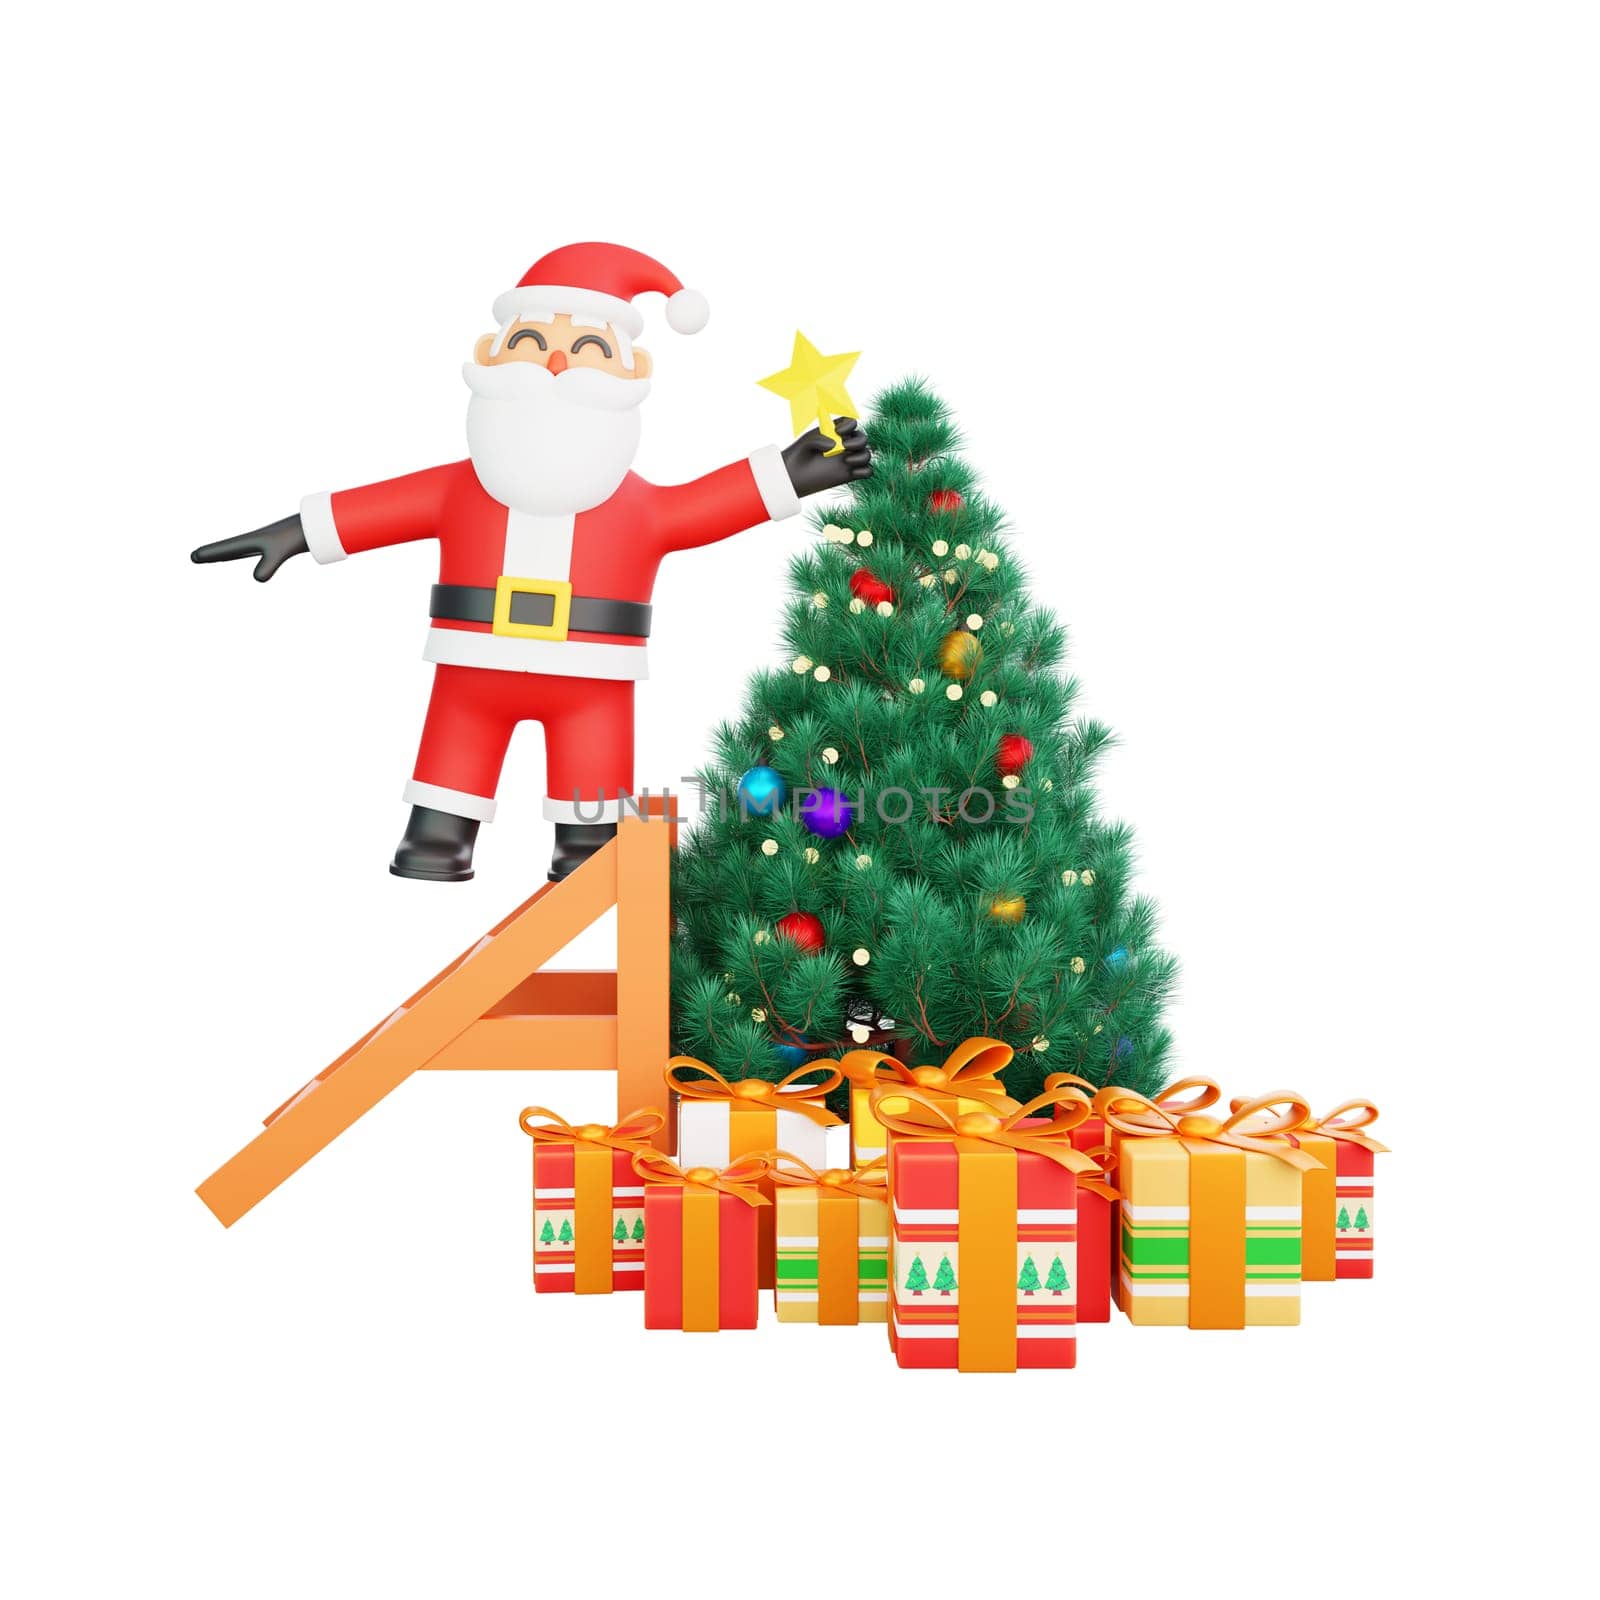 3D rendering Santa Claus in the midst of Christmas preparations, decorating a vibrant tree with a star. Perfect for holiday themed designs and Christmas celebrations